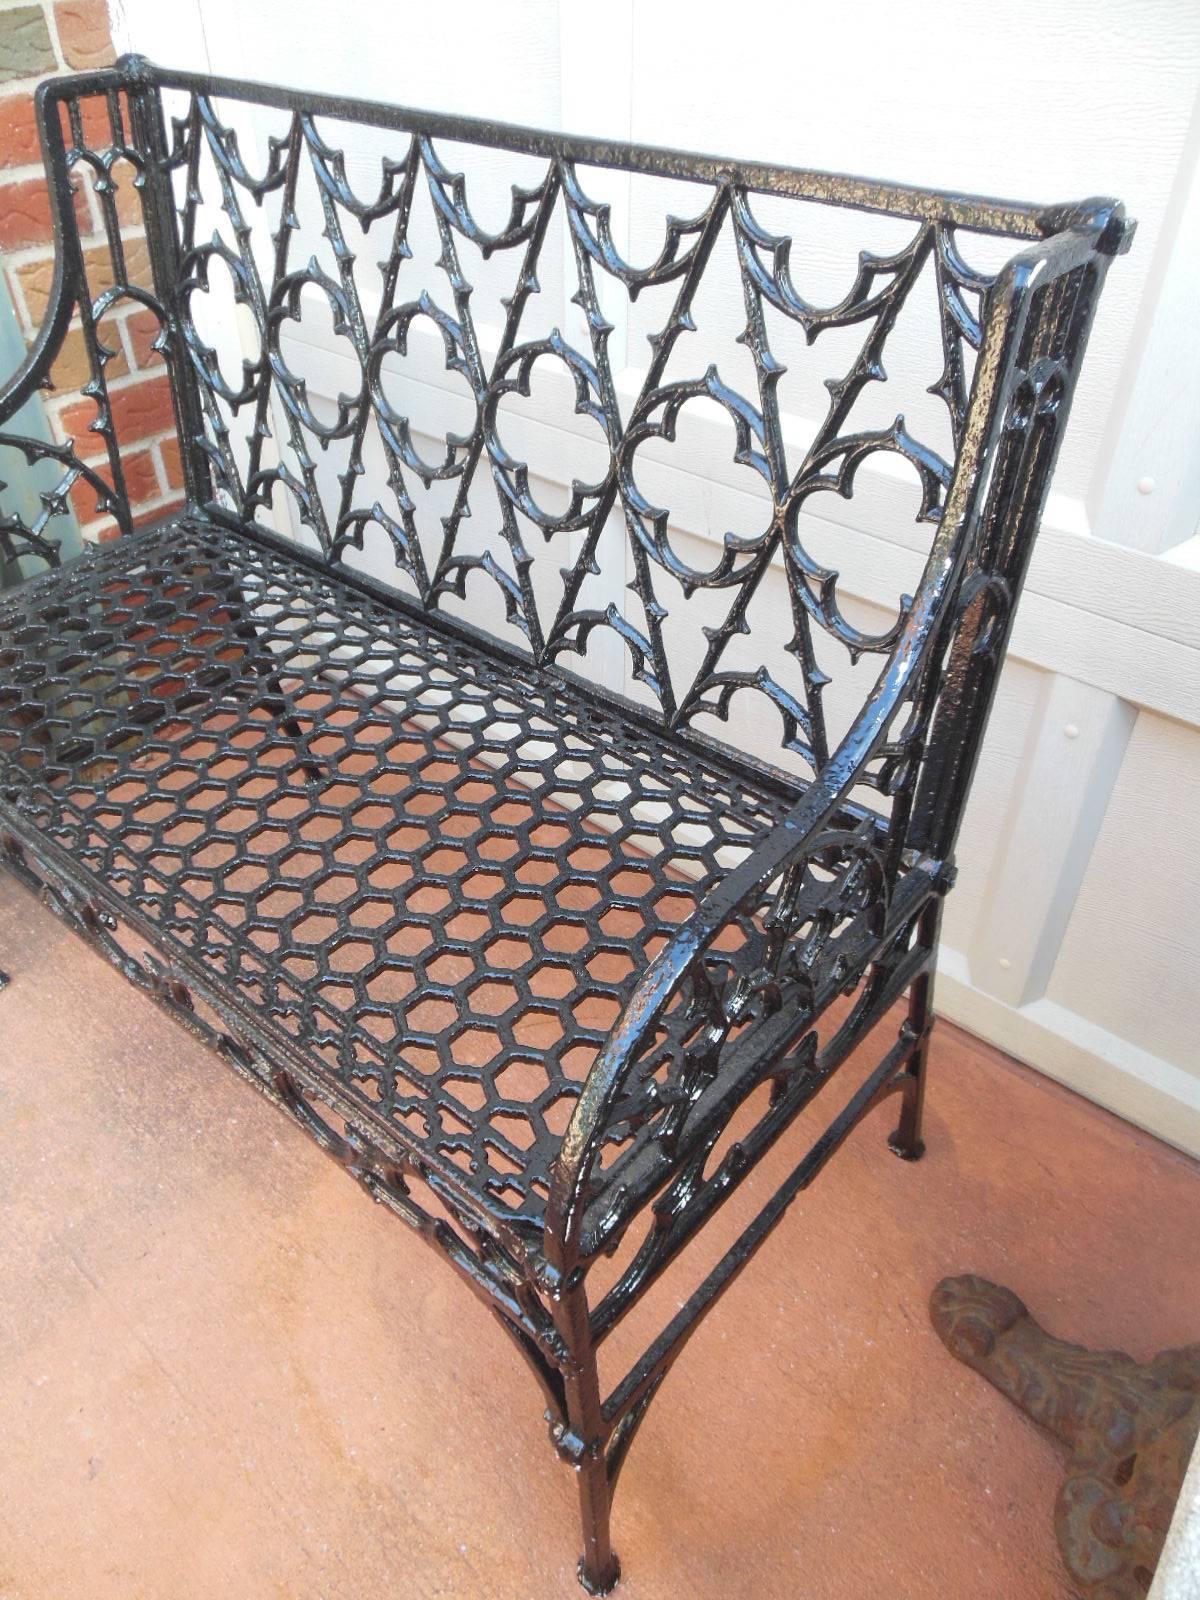 Cast iron Gothic pattern garden bench, mid-19th century decorated with a trefoil and quatrefoil reticulated back. An identical bench in size and design is placed outside the Gothic Revival library in the American wing of the Metropolitan Museum of